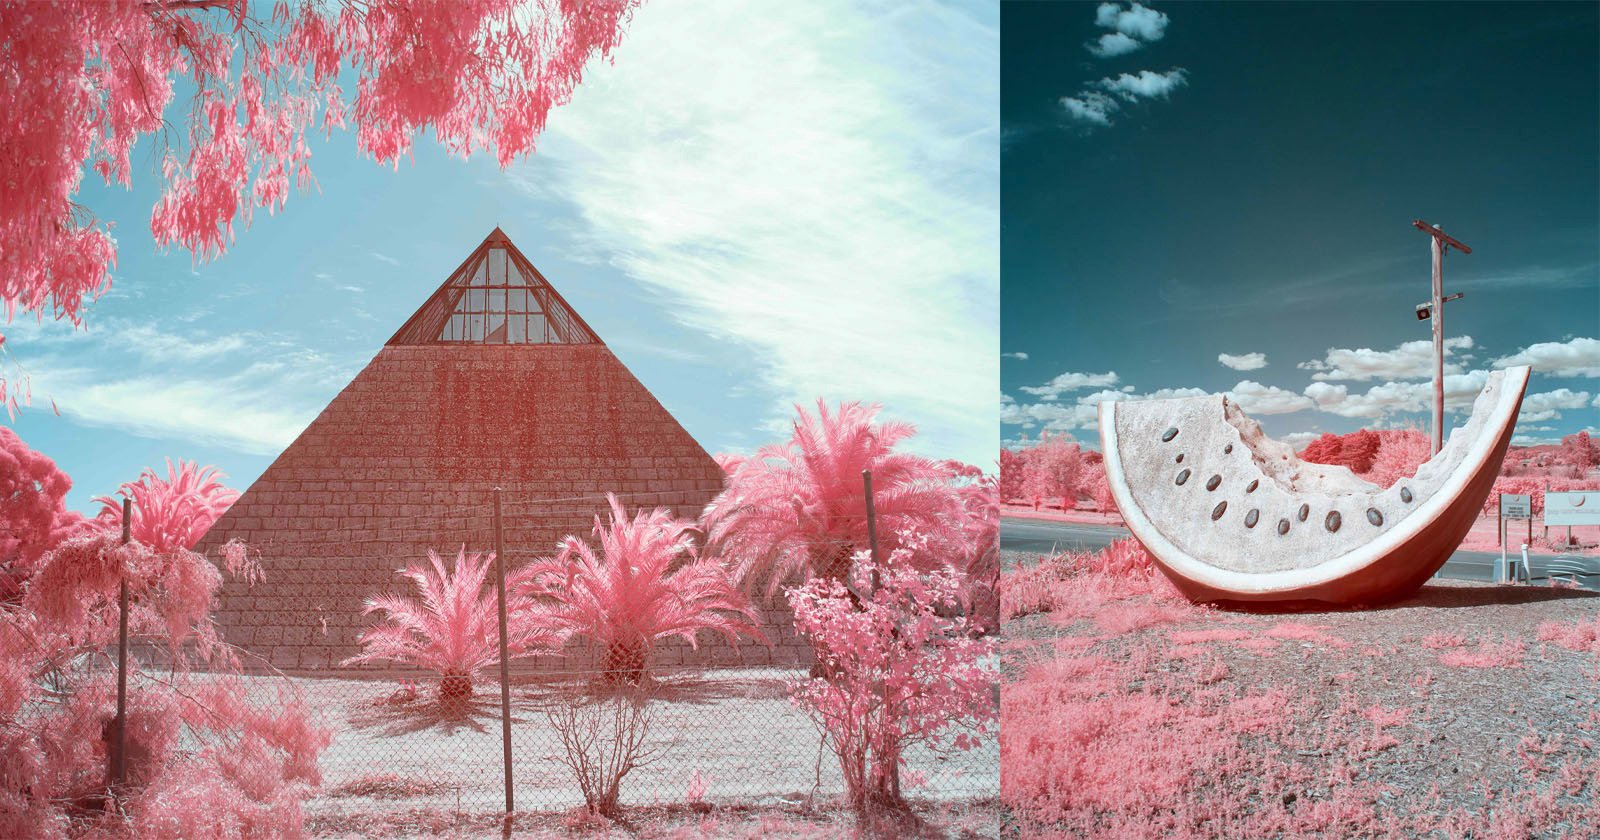 Infrared Photos Capture the Quirkiness of the Australian Outback